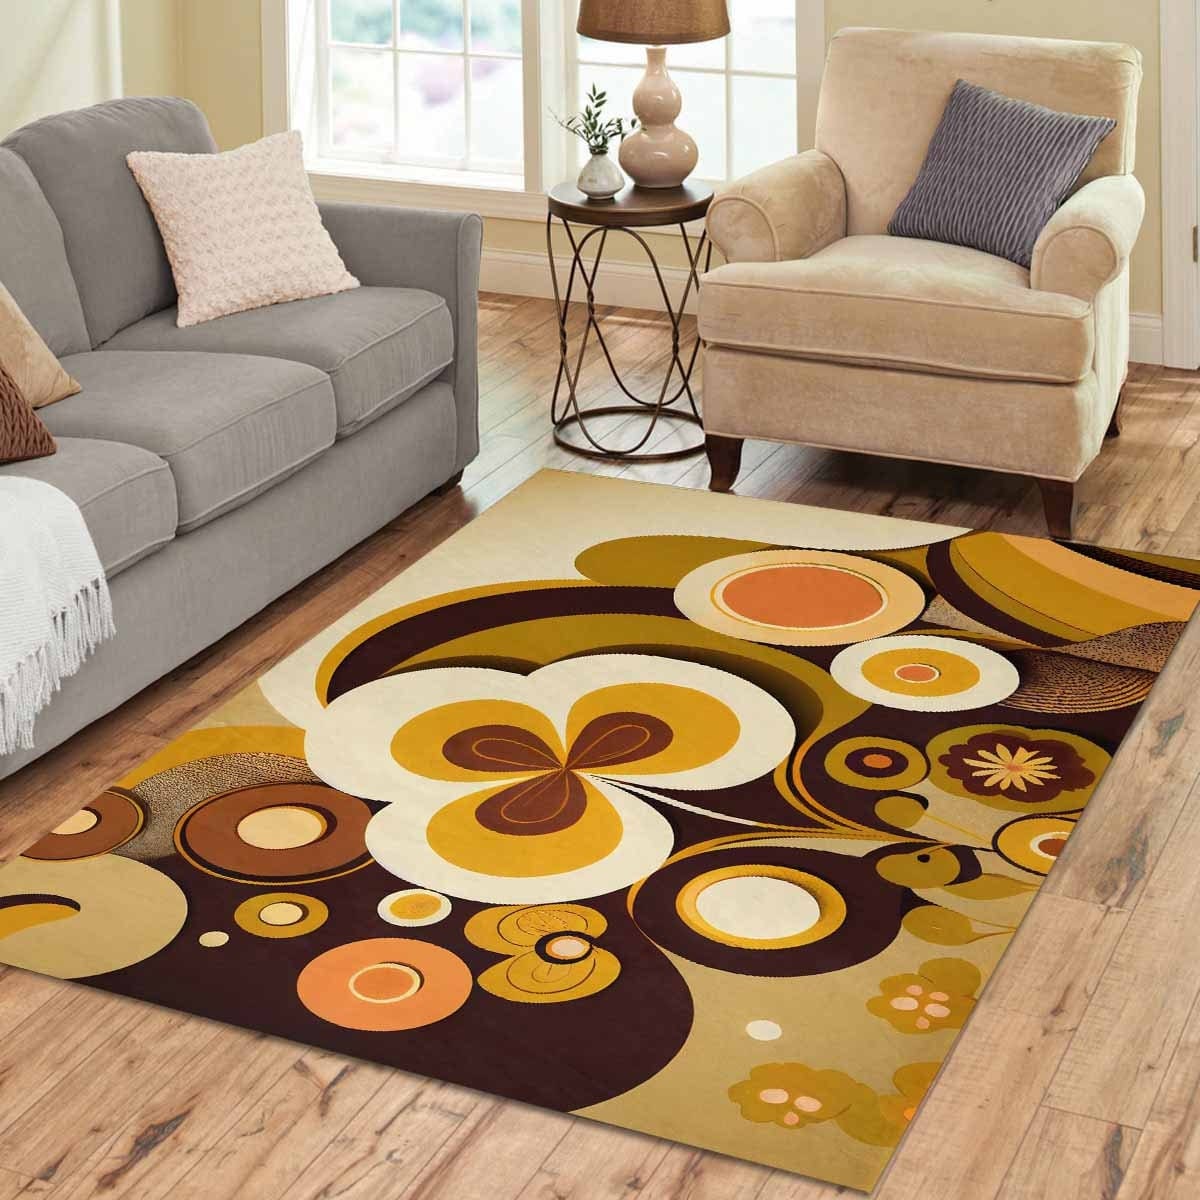 Kate McEnroe New York 60s MCM Geometric Retro Area Rug, 70s Groovy, Hippie Bold Abstract Accent Rug, Mid Century Modern Living Room, Bedroom Carpet - 123681223Rugs17918910641564427415